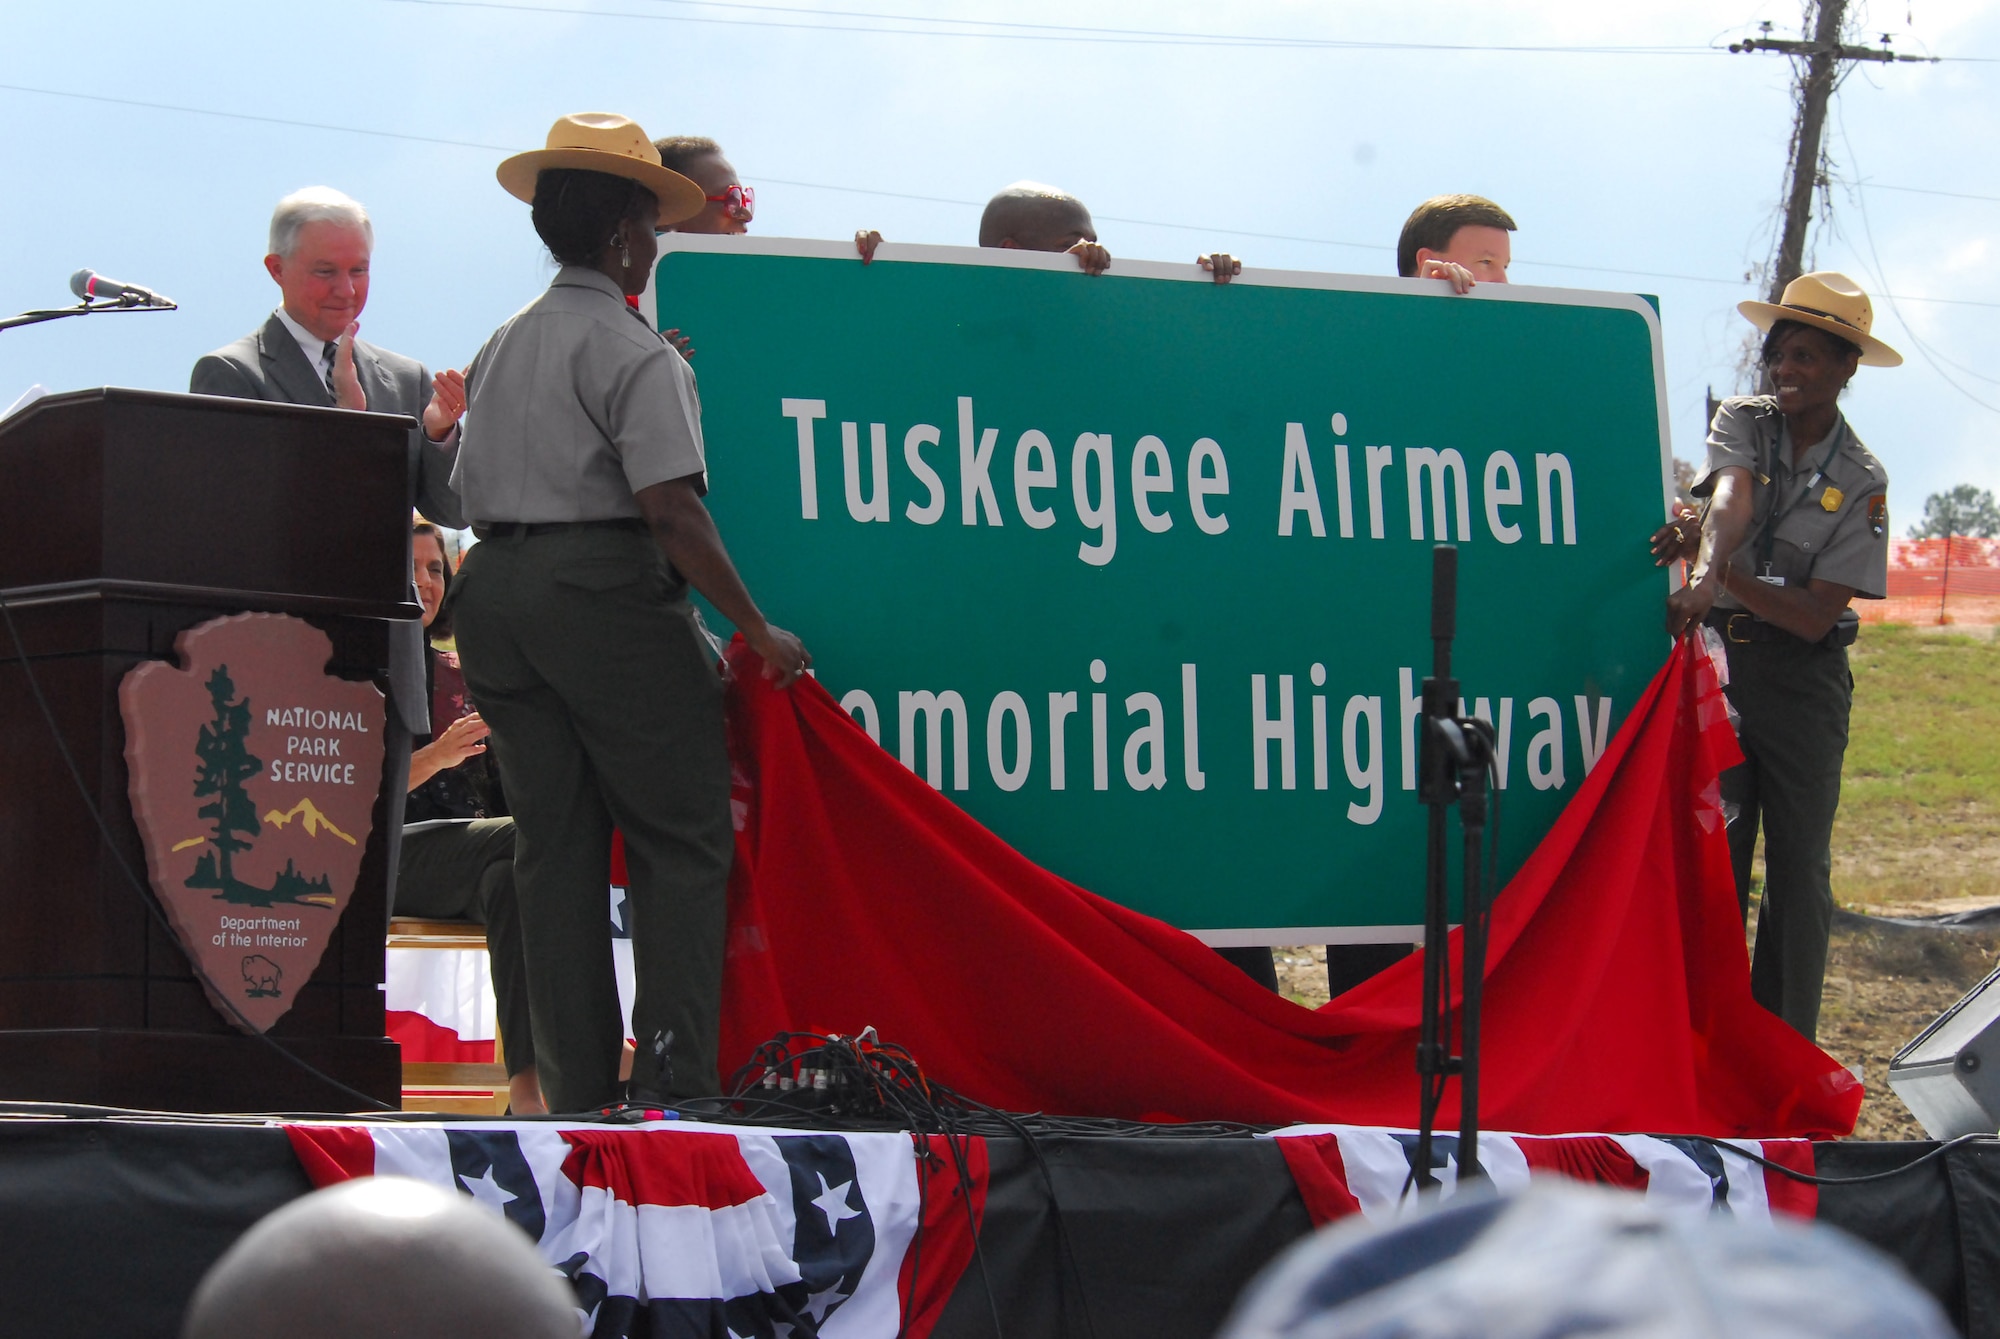 As part of the opening ceremony of the Tuskegee Airmen National Historic Site Oct. 10 at Moton Field, Ala., National Park Service officials unveil a sign that designates part of Interstate 85, which passes near the city of Tuskegee, as the Tuskegee Airmen Memorial Highway. Sen. Jeff Sessions of Alabama looks on from behind. (Air Force photo by Scott Knuteson)